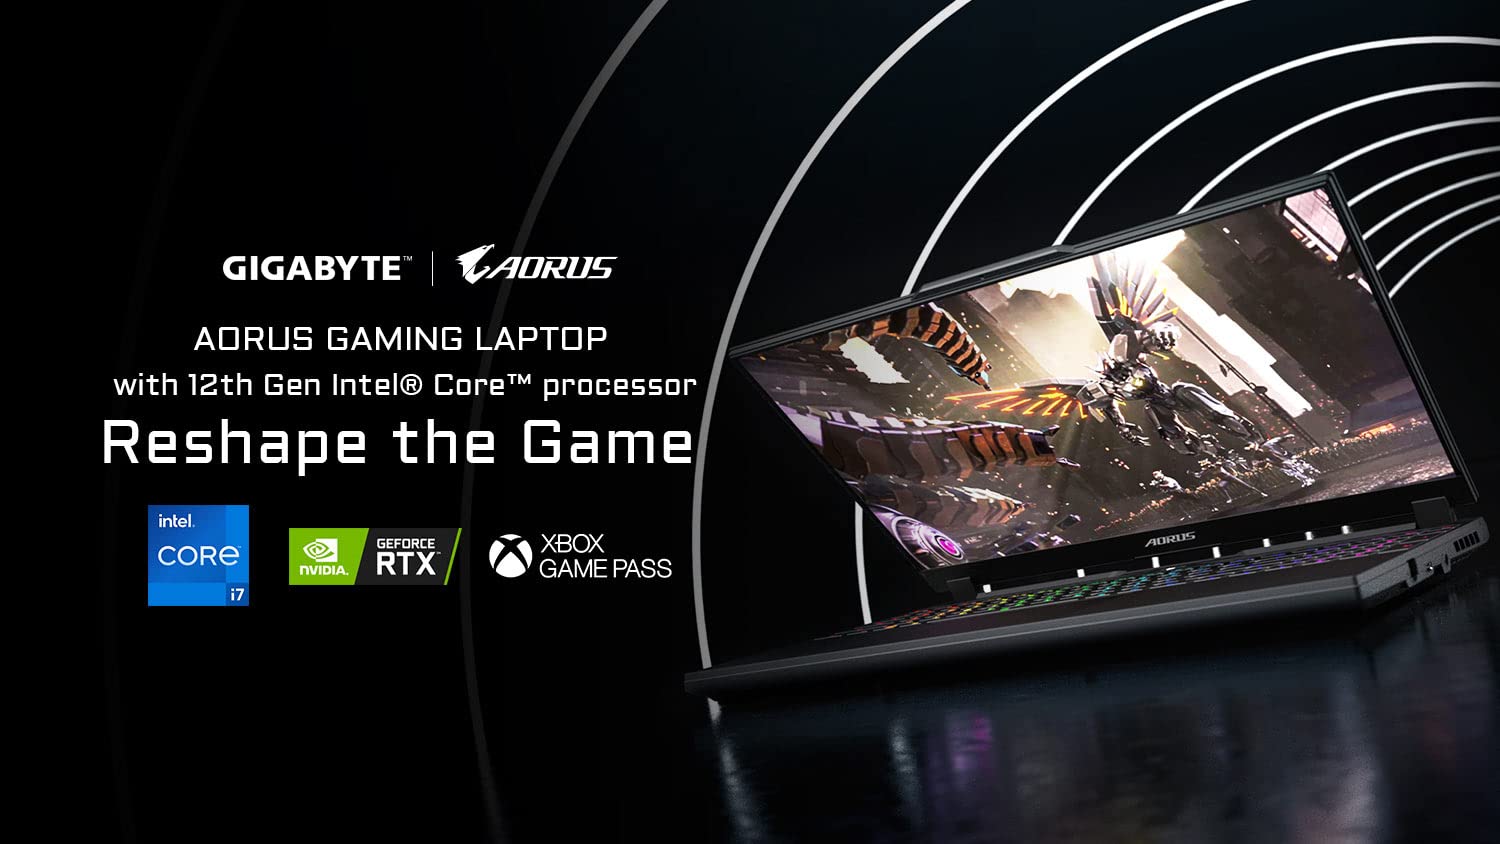 AORUS Unveils High-End Gaming Laptops to Reshape the Game